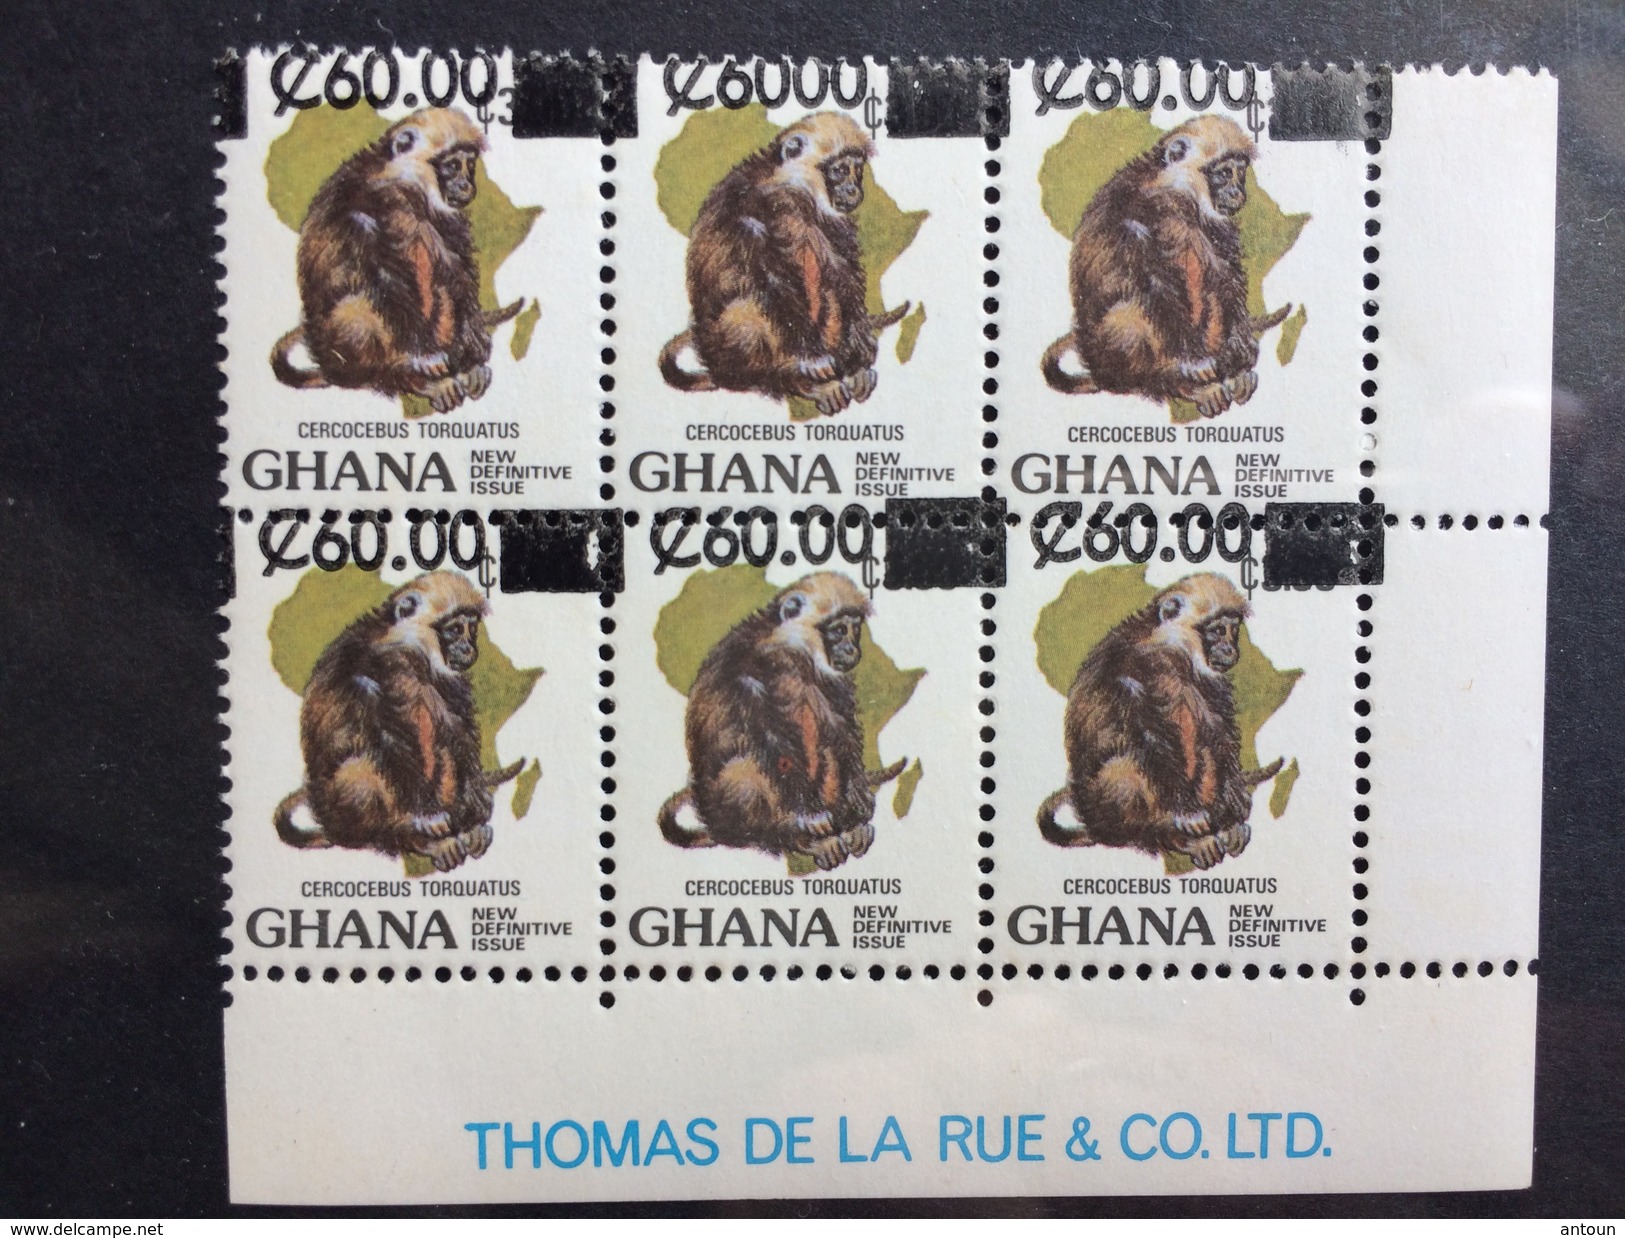 Ghana  1988  Def Sur.- Block Of 6 - Decimal Point Omitted - Becomes C 6000 Instead Of C 60.00  Postage Fee To Be Added - Ghana (1957-...)